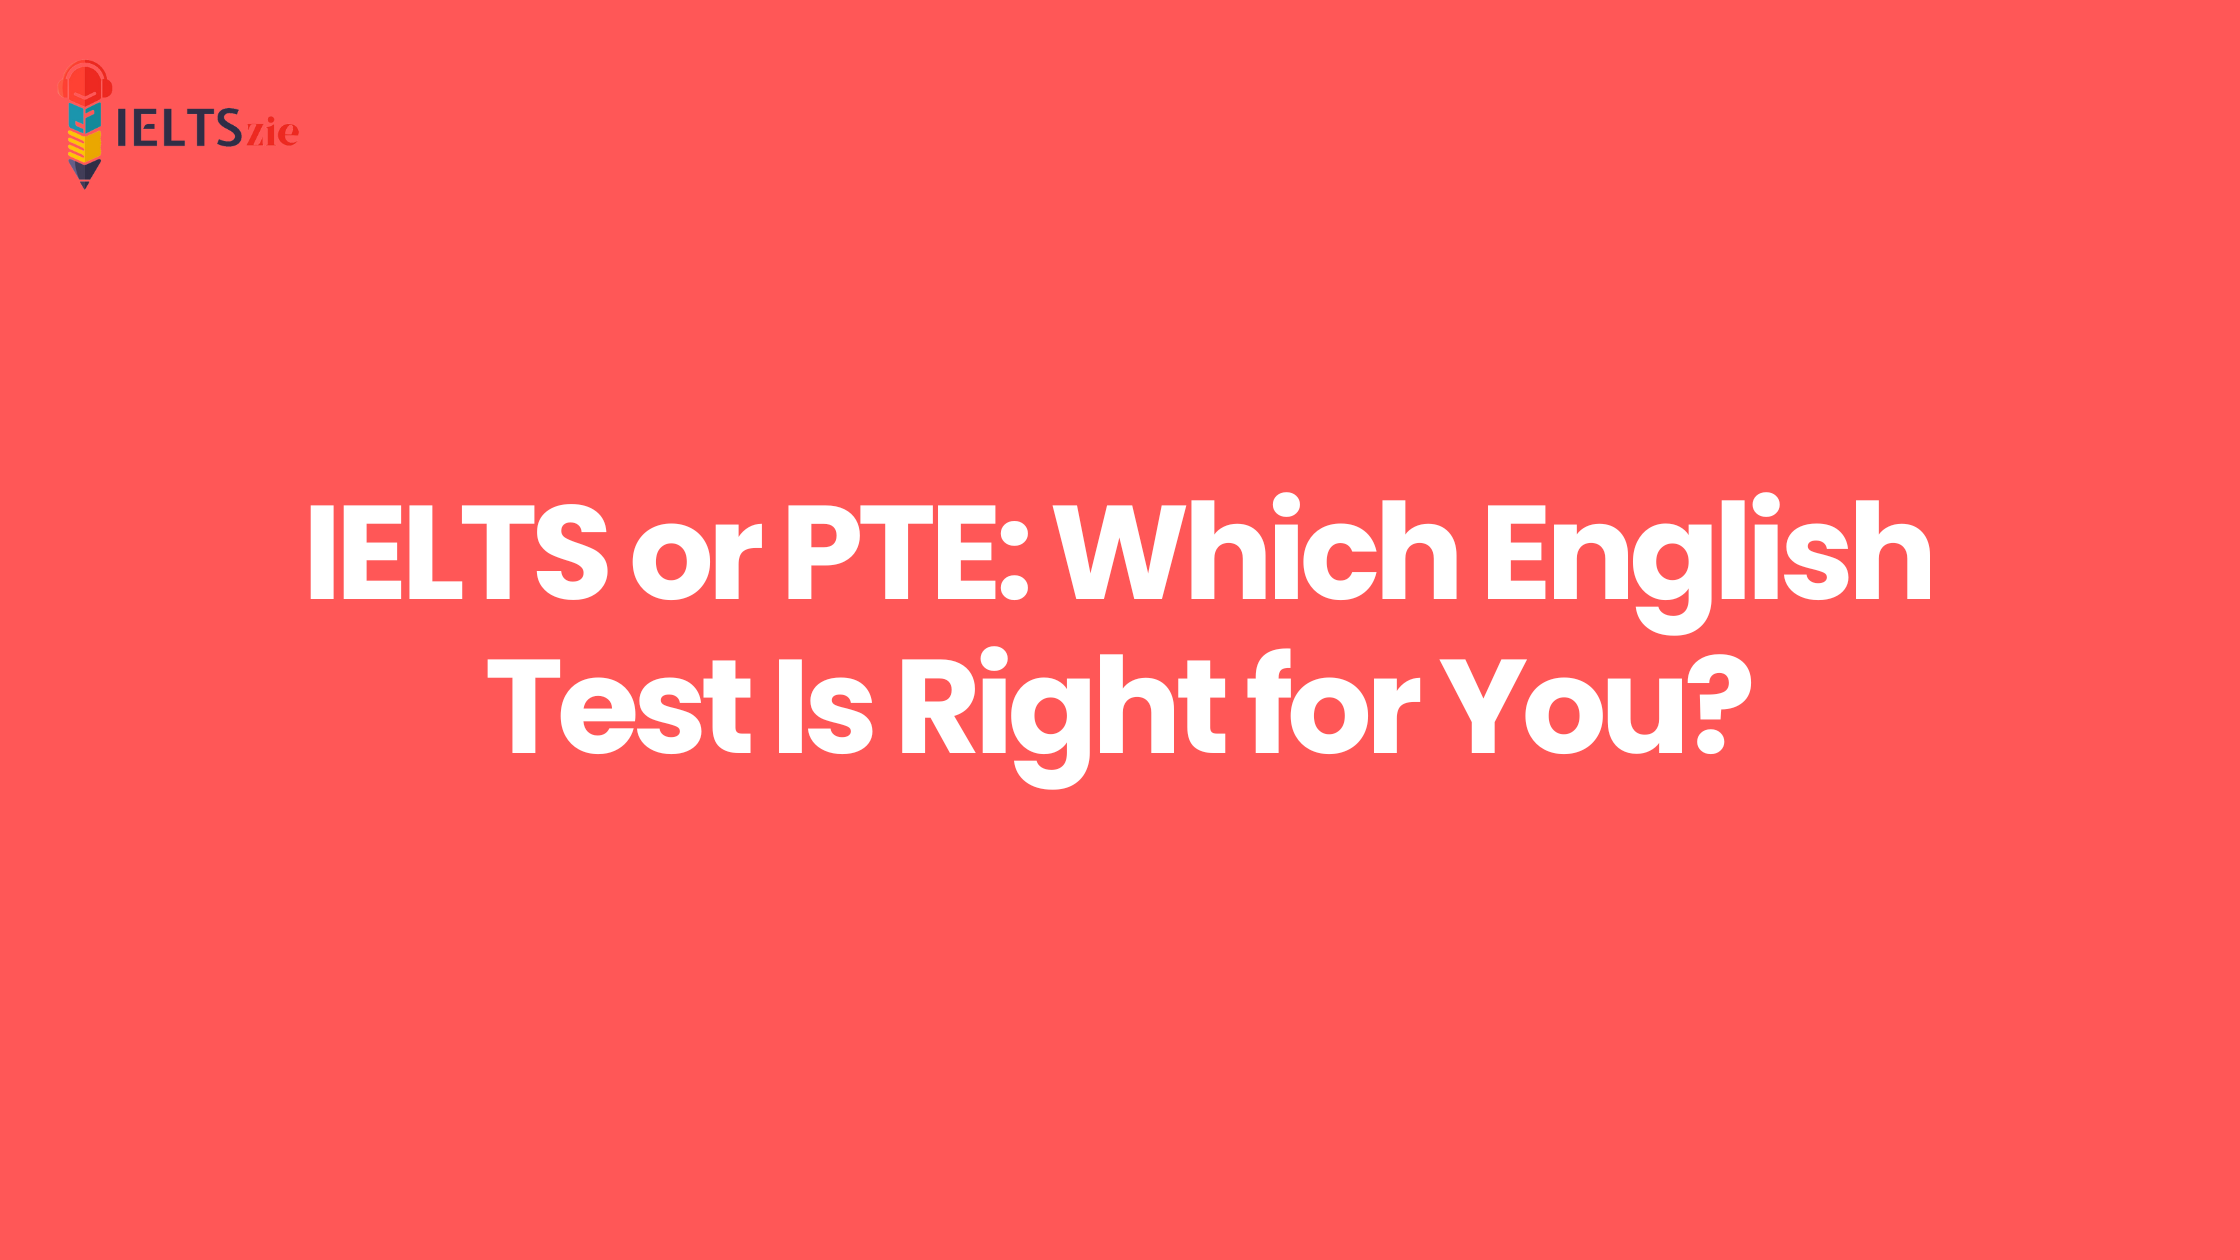 IELTS or PTE: Which English Test Is Right for You?